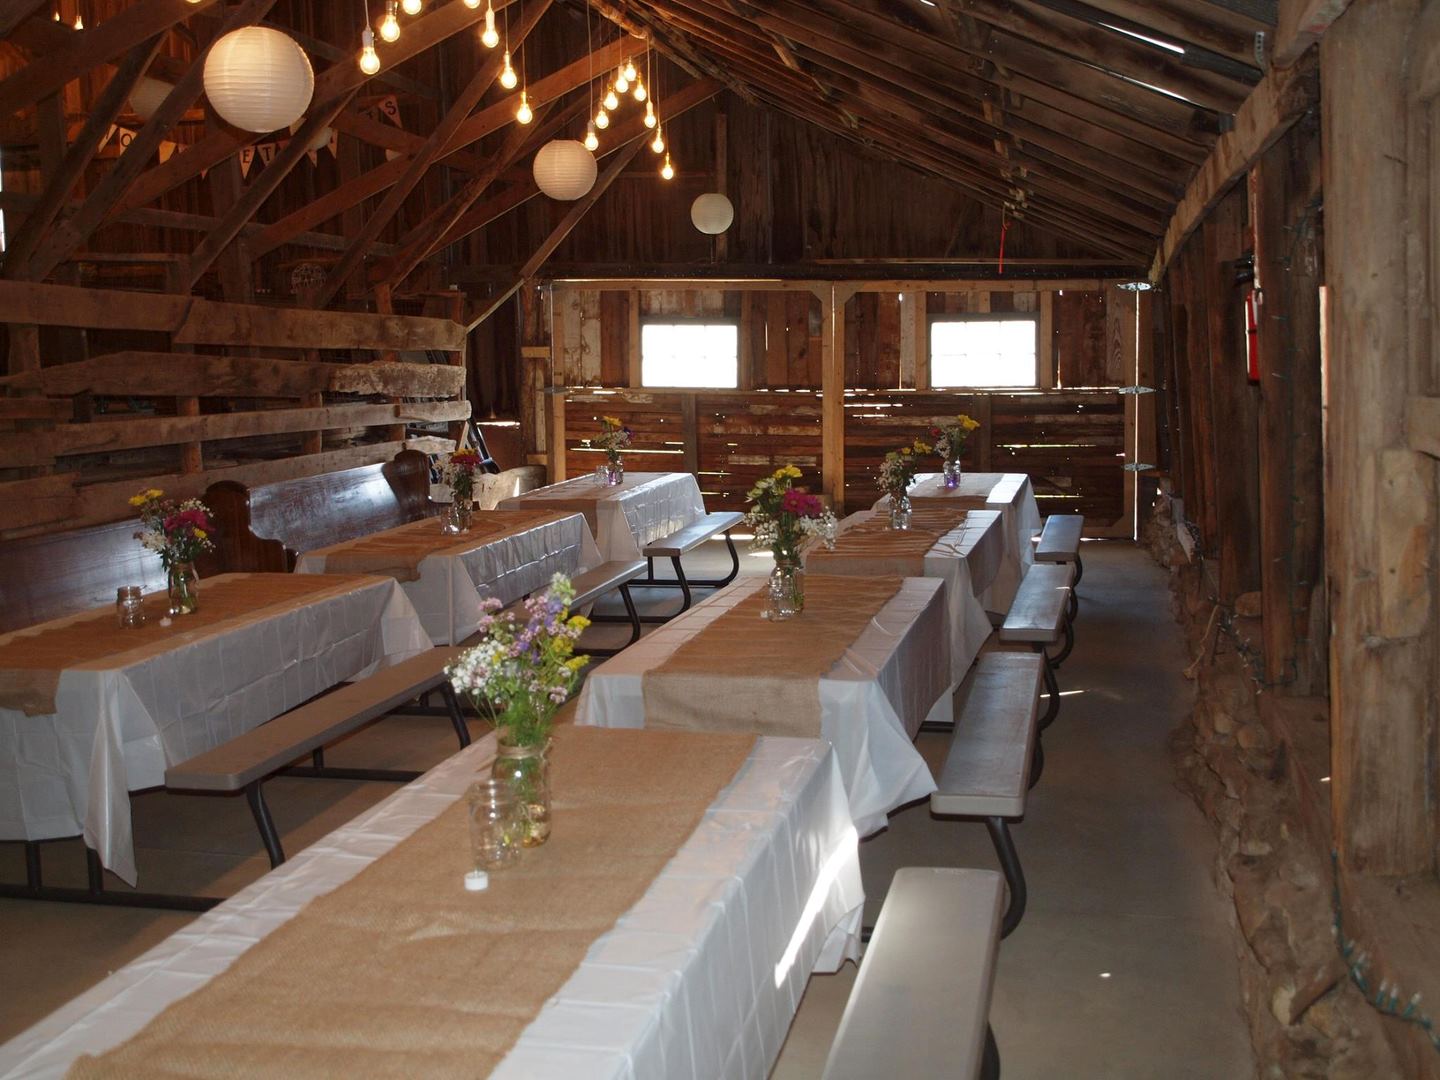 Just The Place Barn Weddings - 6